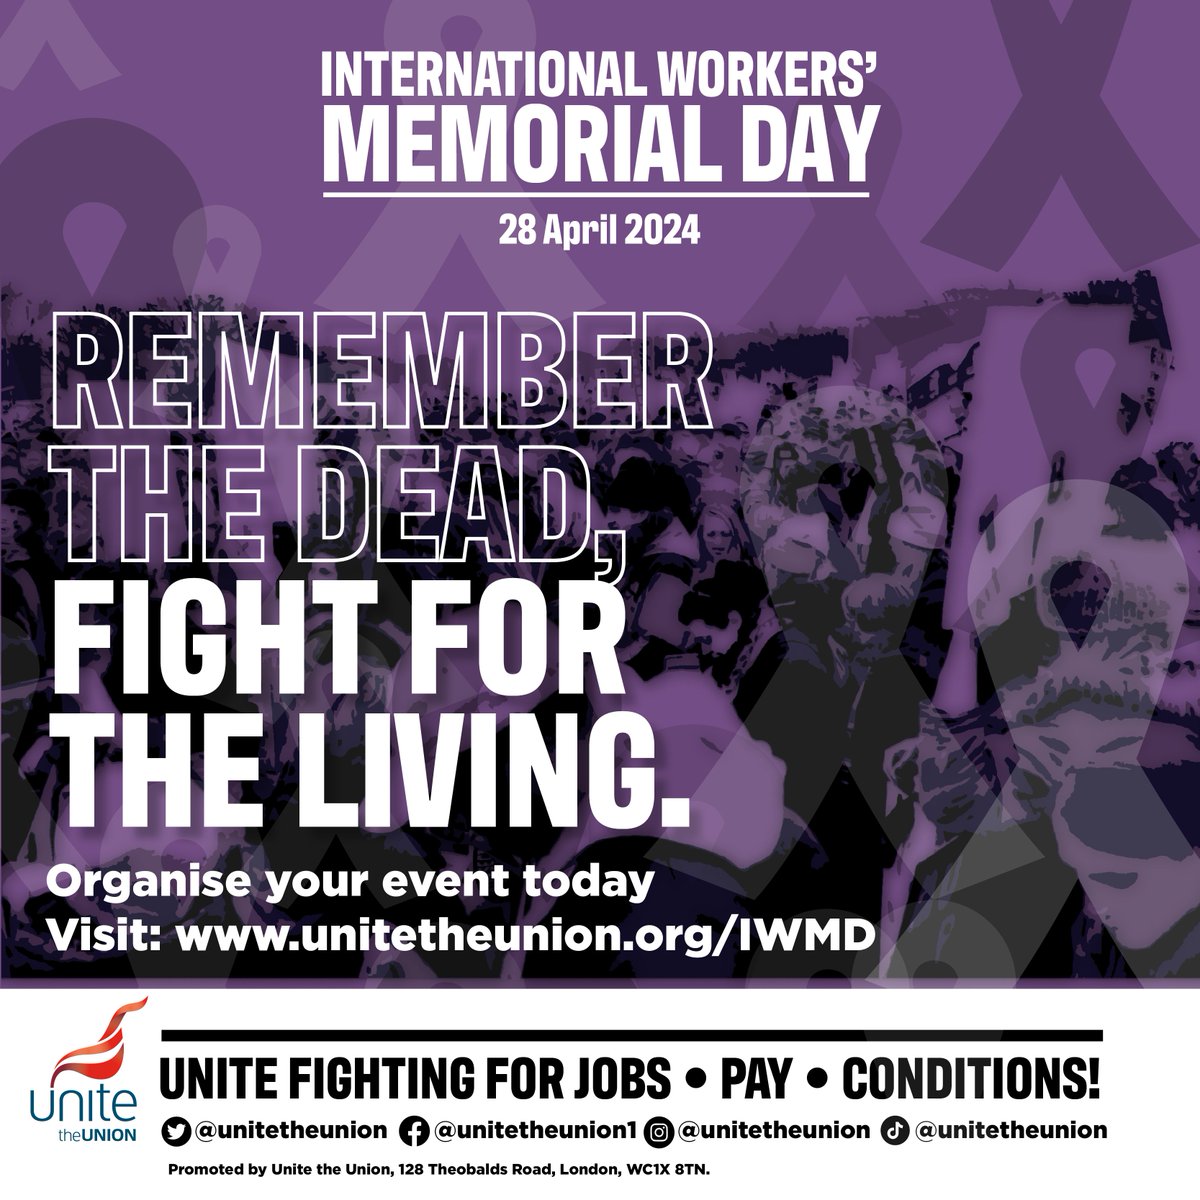 Get ready for International Workers' Memorial Day on 28 April! Here's 3 ways you can get involved: 1. Plan your own event. 2. Display a poster at your workplace. 3. Share this graphic to raise awareness. For more resources, visit our website: unitetheunion.org/iwmd #IWMD24